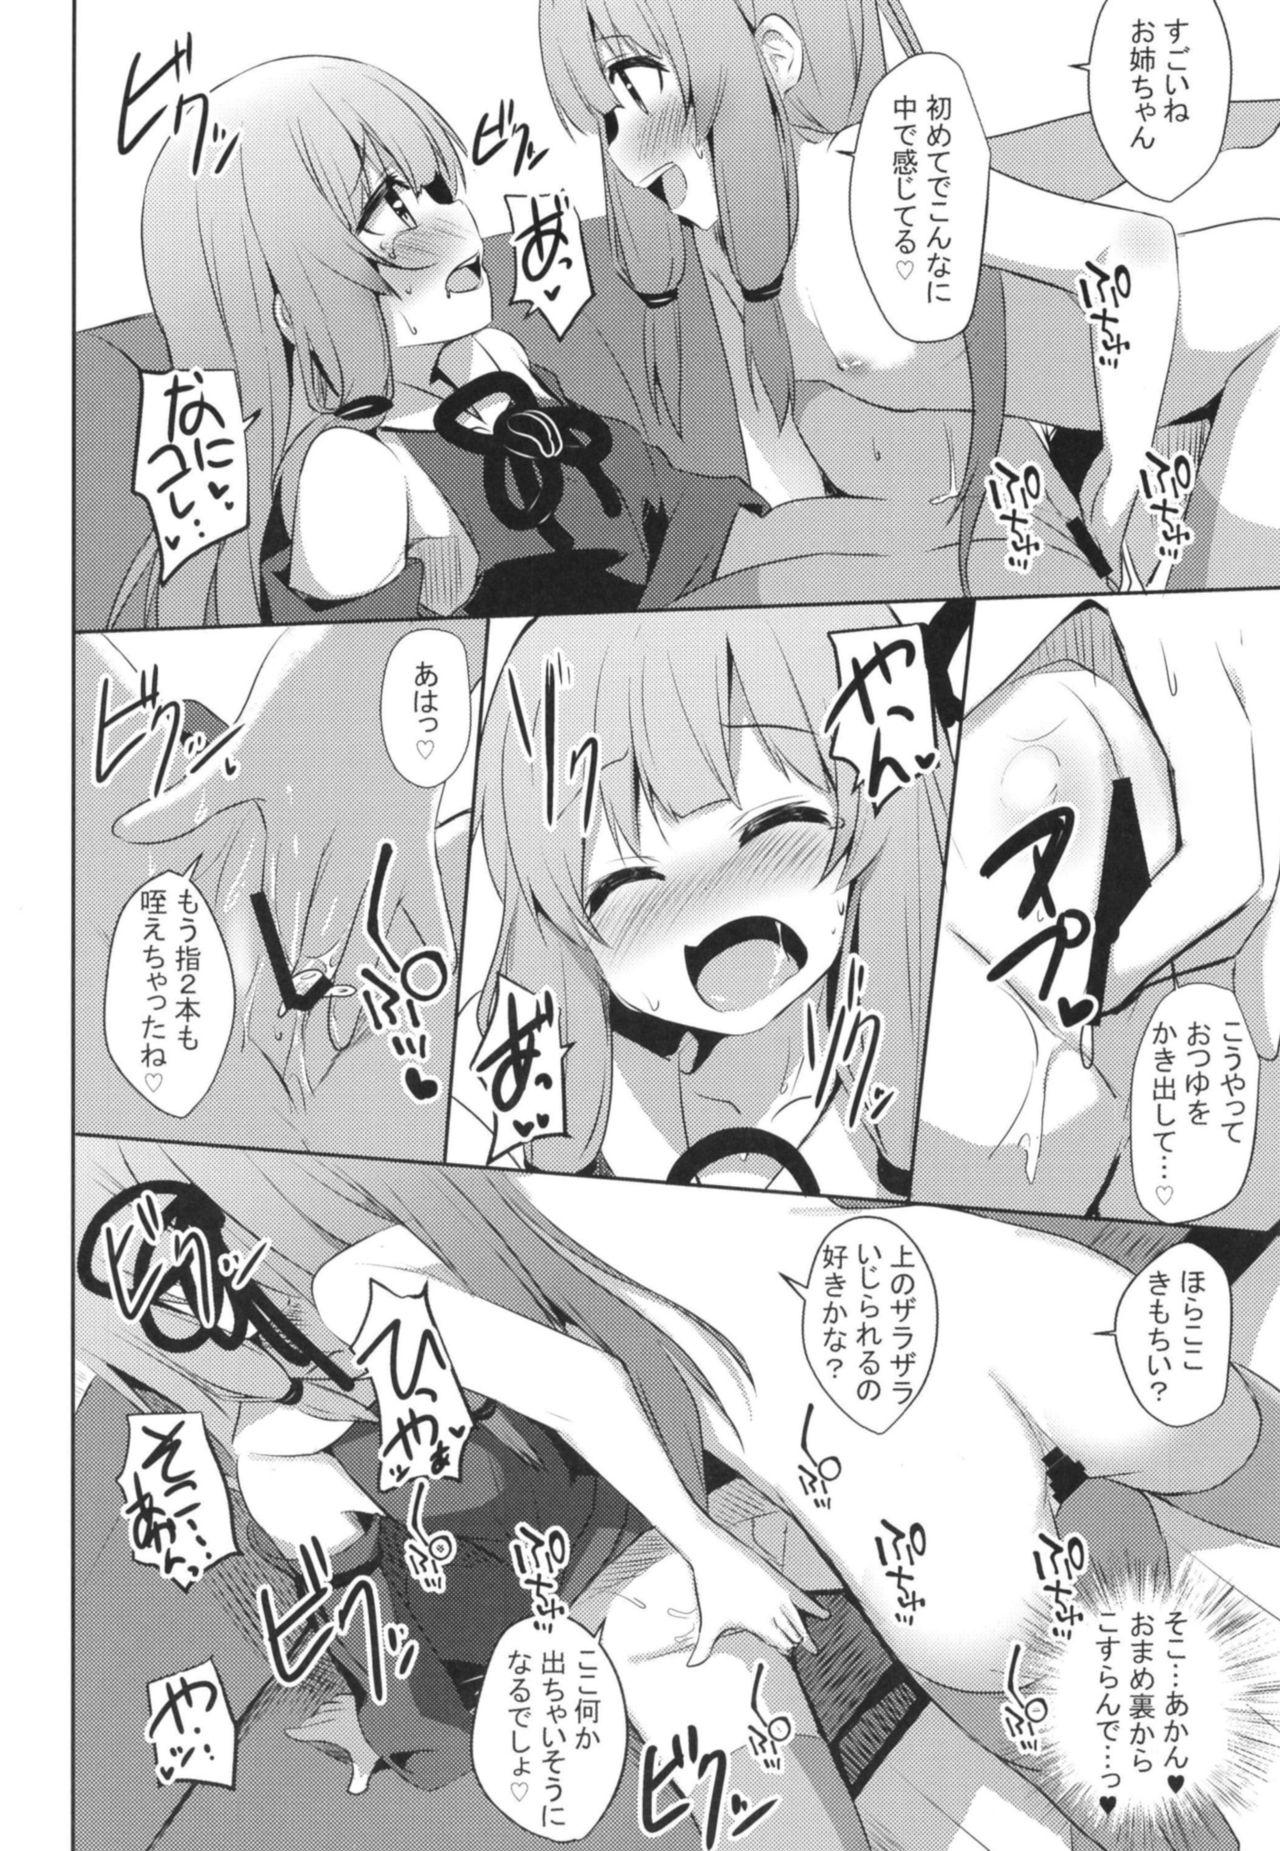 Fist [Milk Pudding (Jamcy)] Akane-chan Challenge! 4-kaime (VOICEROID) [Digital] - Voiceroid Special Locations - Page 7